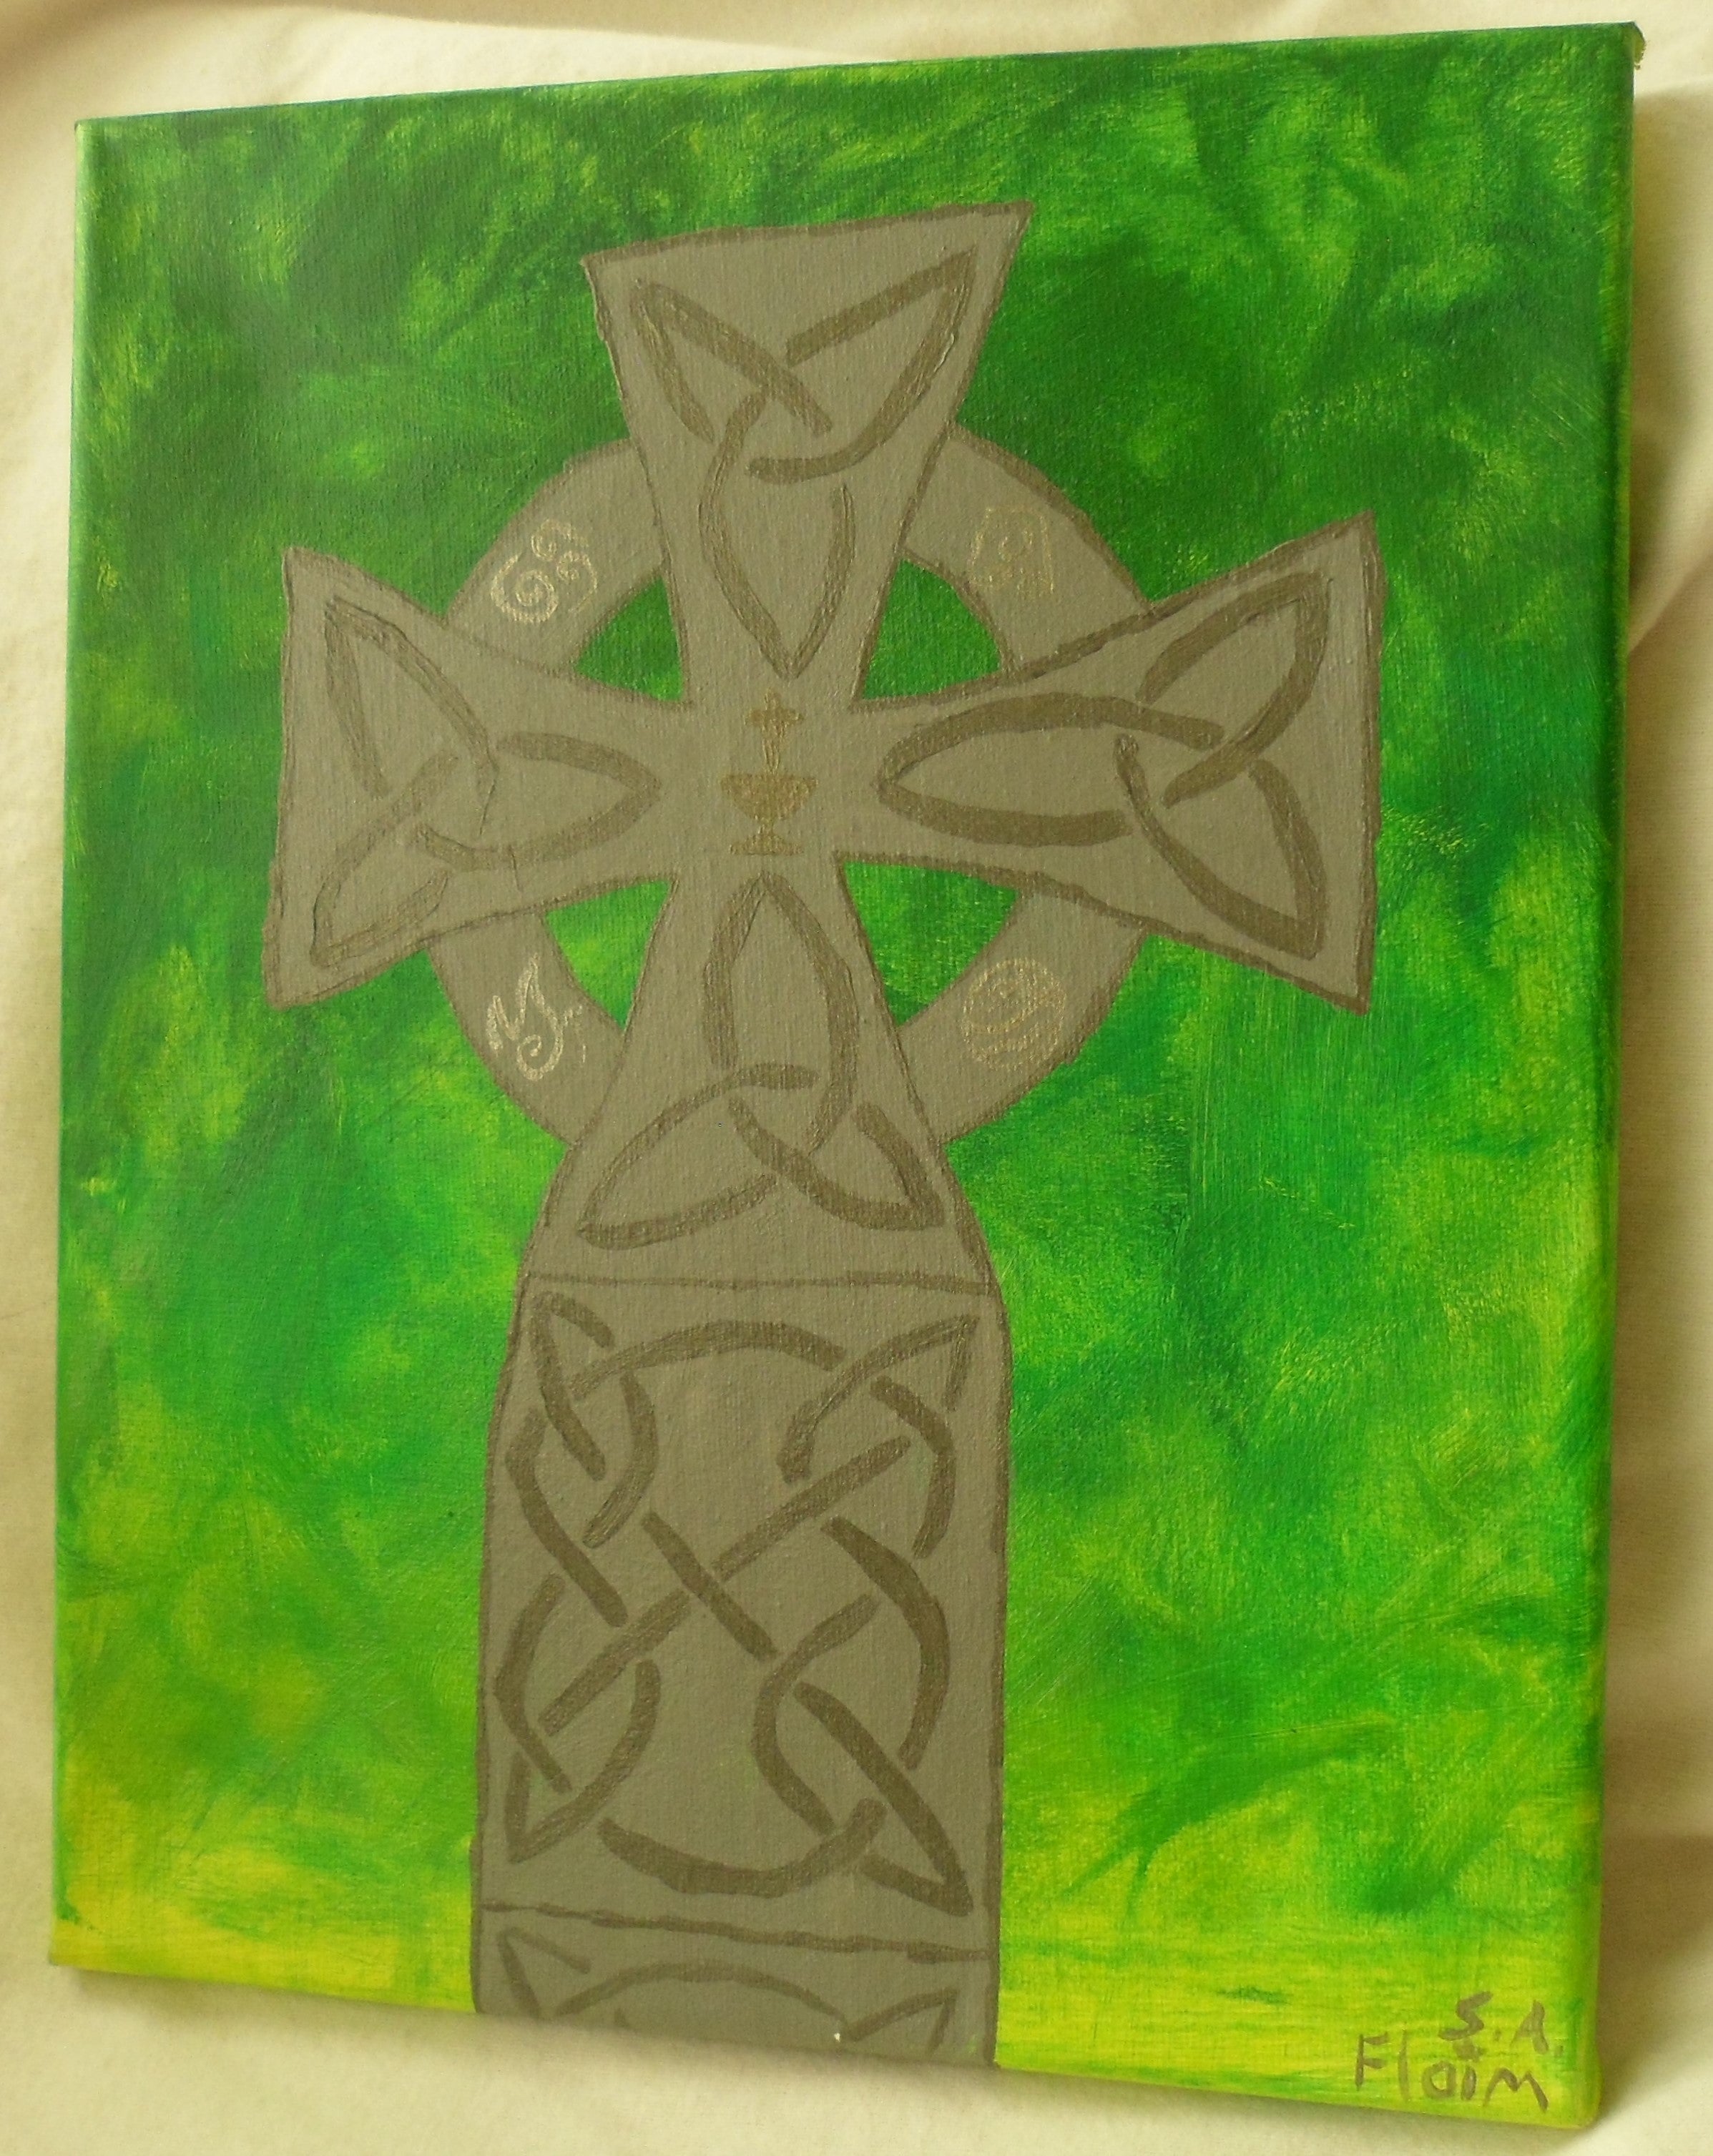 Celtic Cross by S.A.Flaim - Tully Crafts